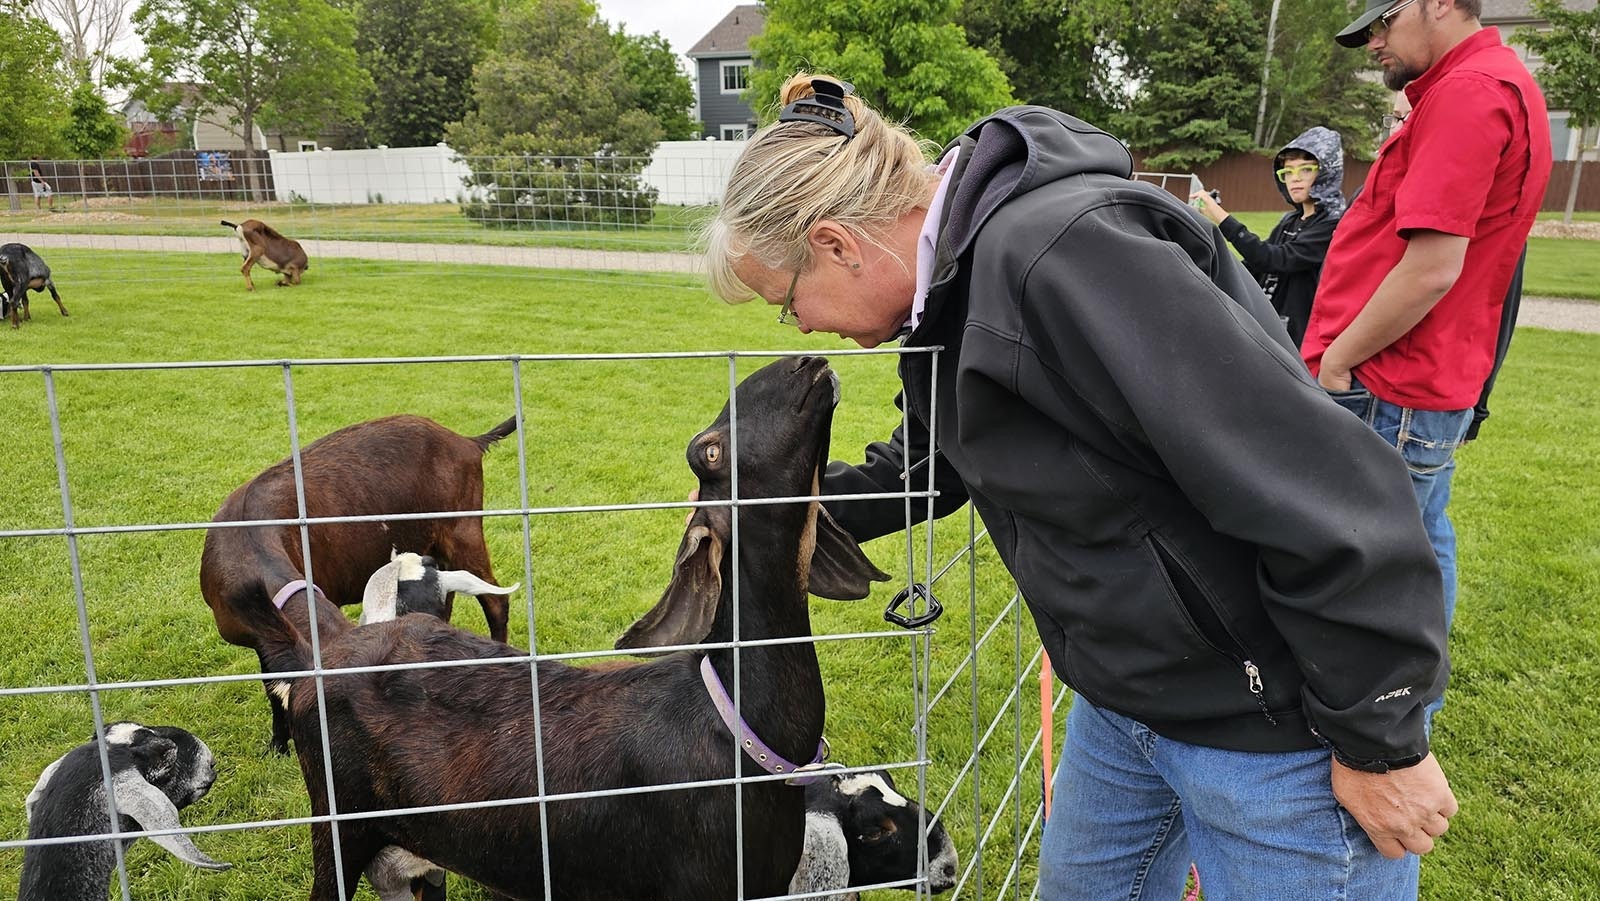 Wyoming Dairy Goats Association President Ann Larson bends to kiss a goat.